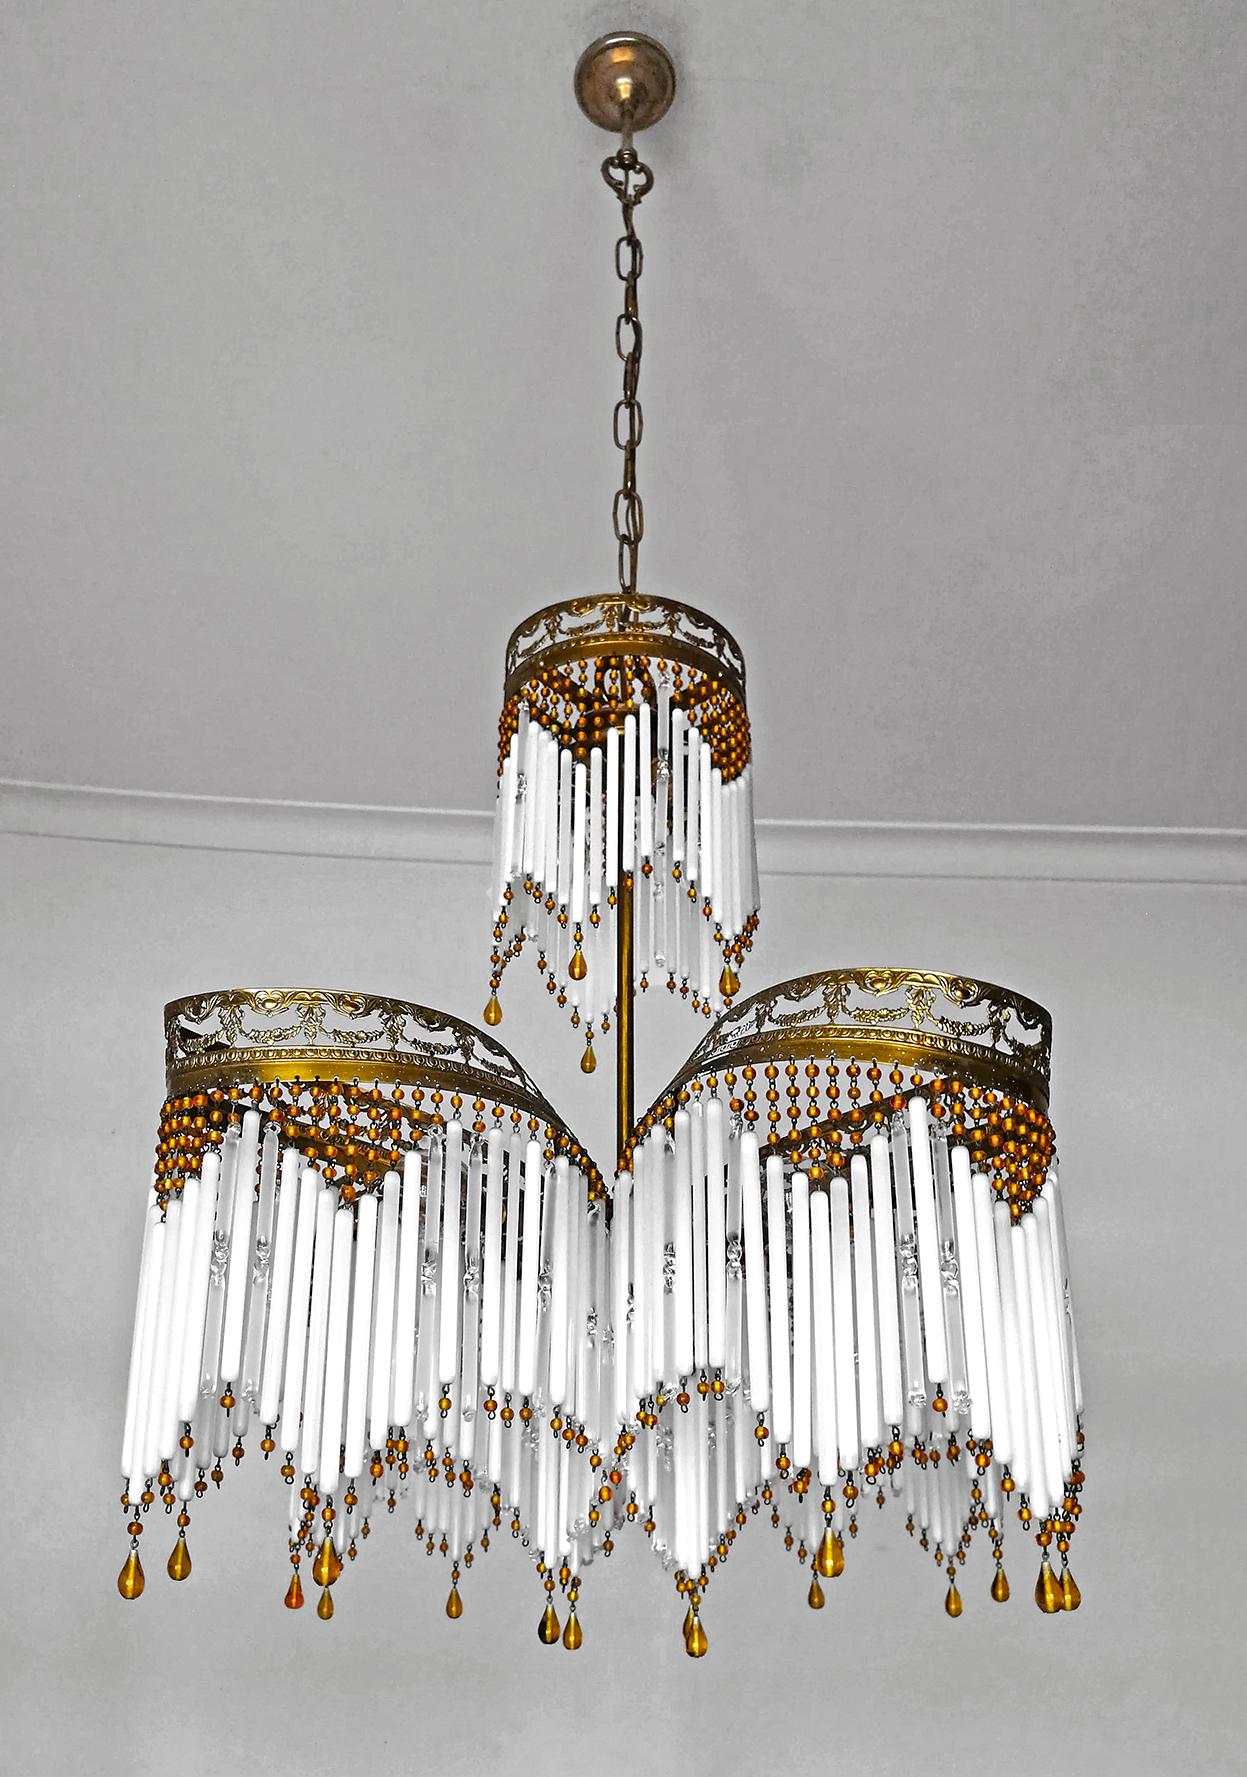 Gorgeous antique French chandelier in beaded opaline glass tubes, Art Deco / Art Nouveau, circa 1920.
Dimensions:
Height 49.22 in. (chain 17.71 in.)/ 125 cm (chain 45cm)
Diameter 20.48 in. (52 cm)
6-light bulbs E14/ good working condition.
Age